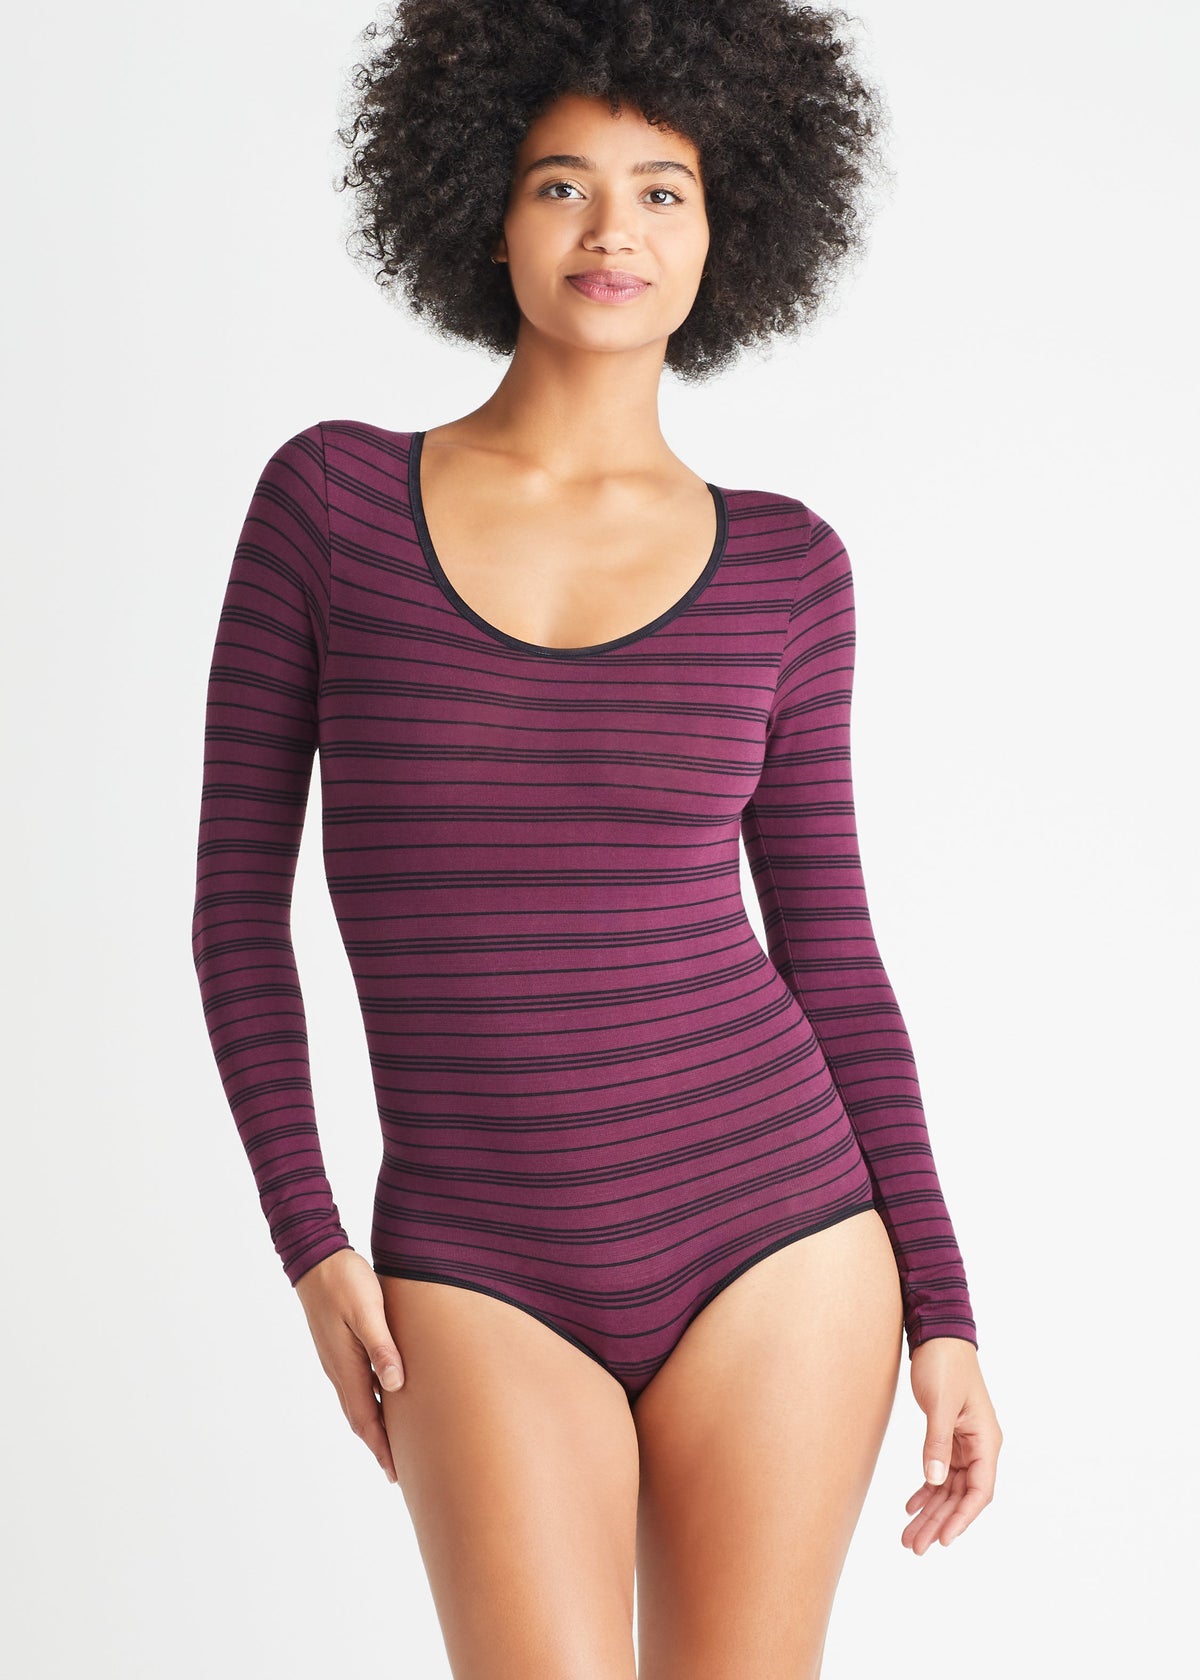 Long Sleeve Shaping Bodysuit - Cotton Seamless from Yummie in Potent Purple/Black Stripe  - 1